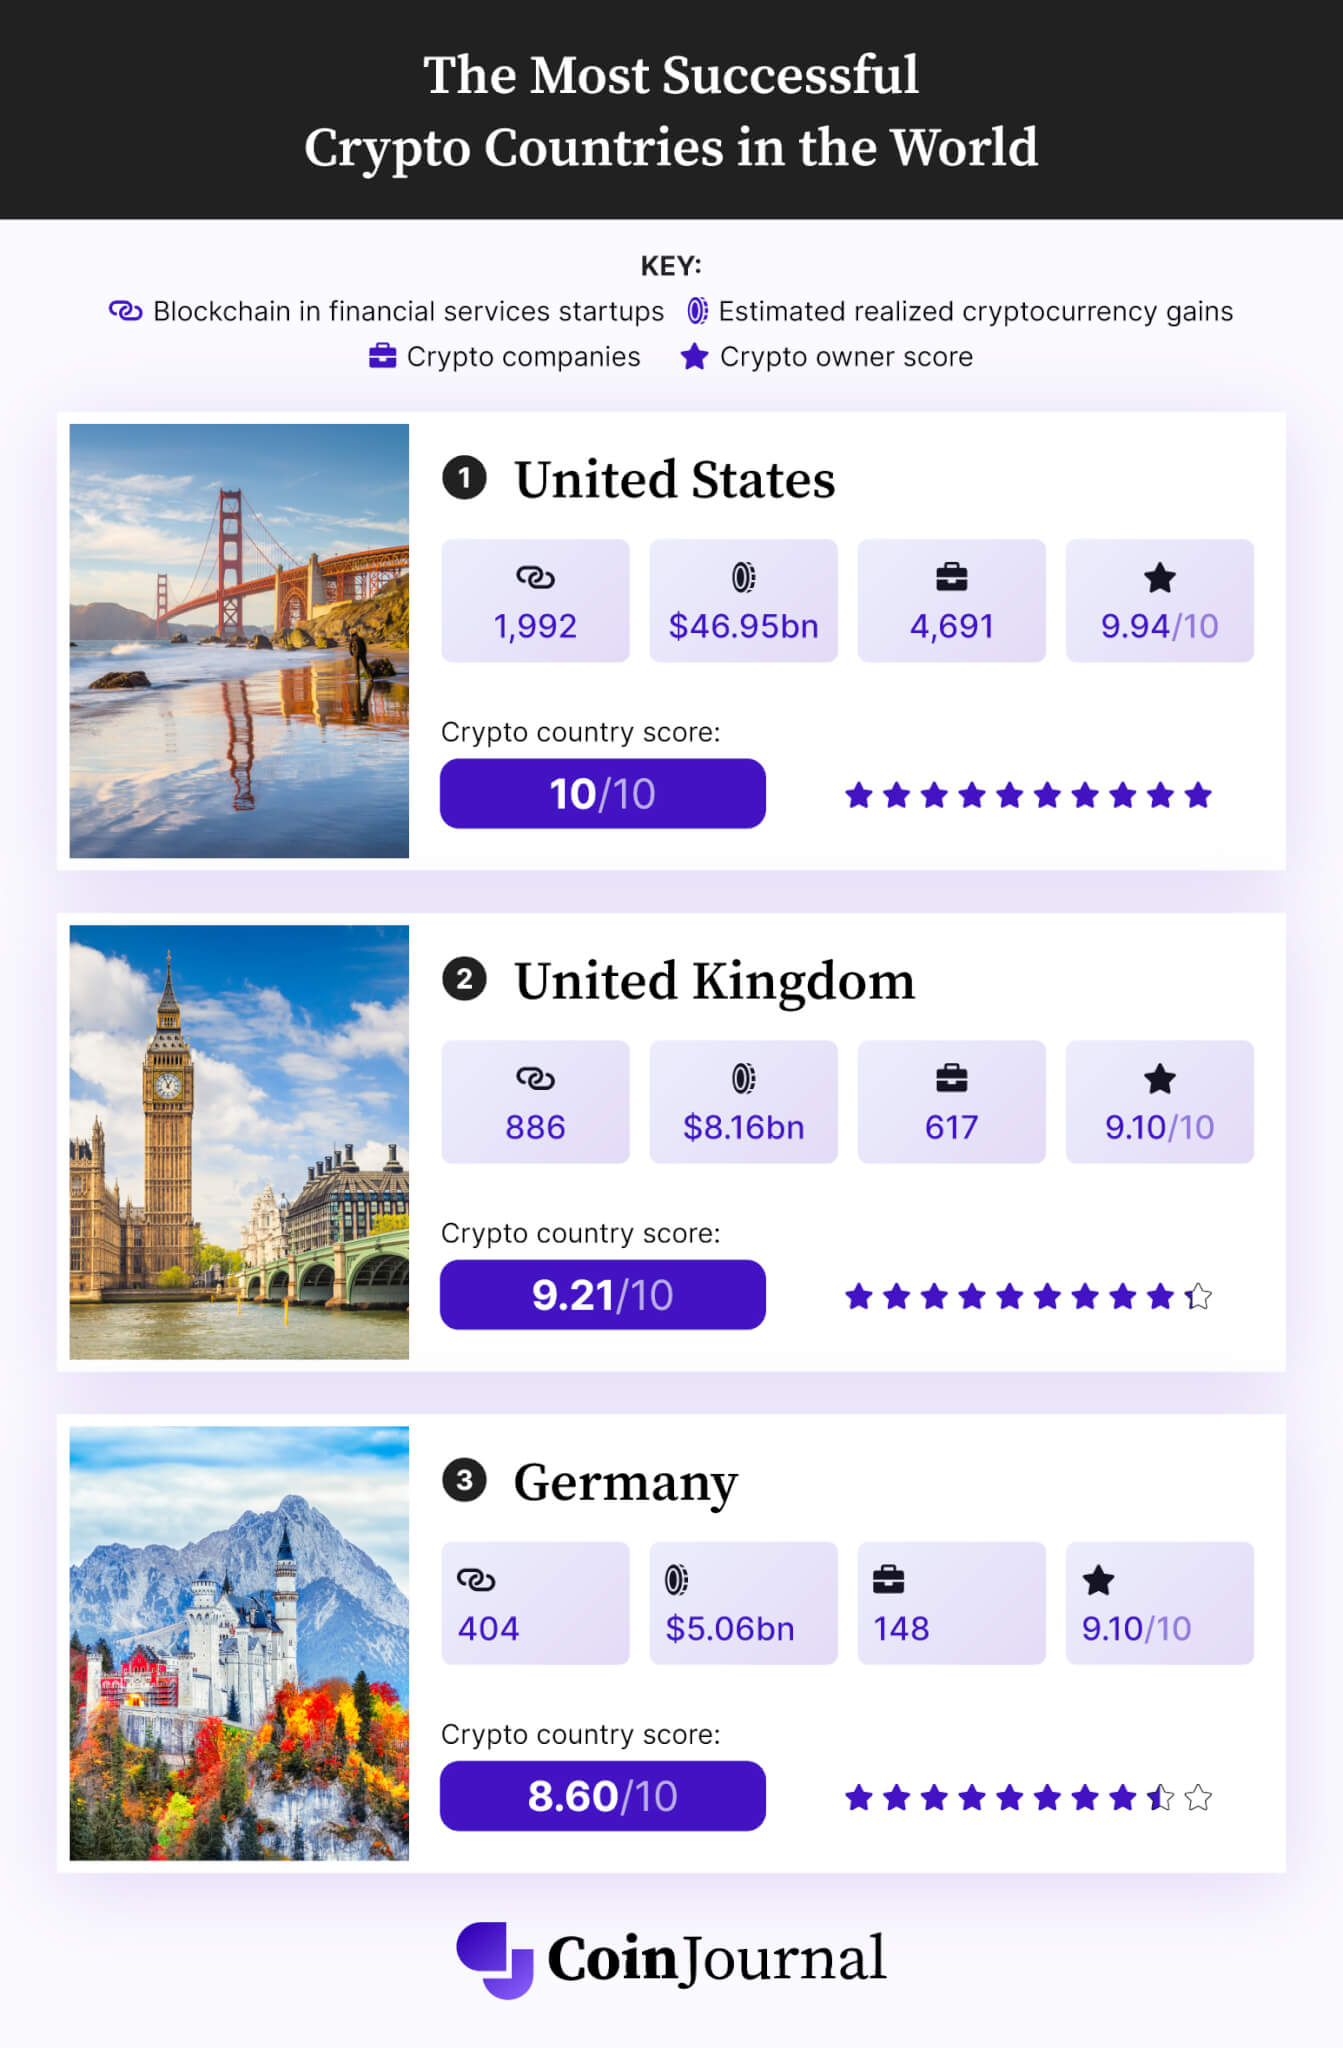 The Most Successful Crypto Countries in the World